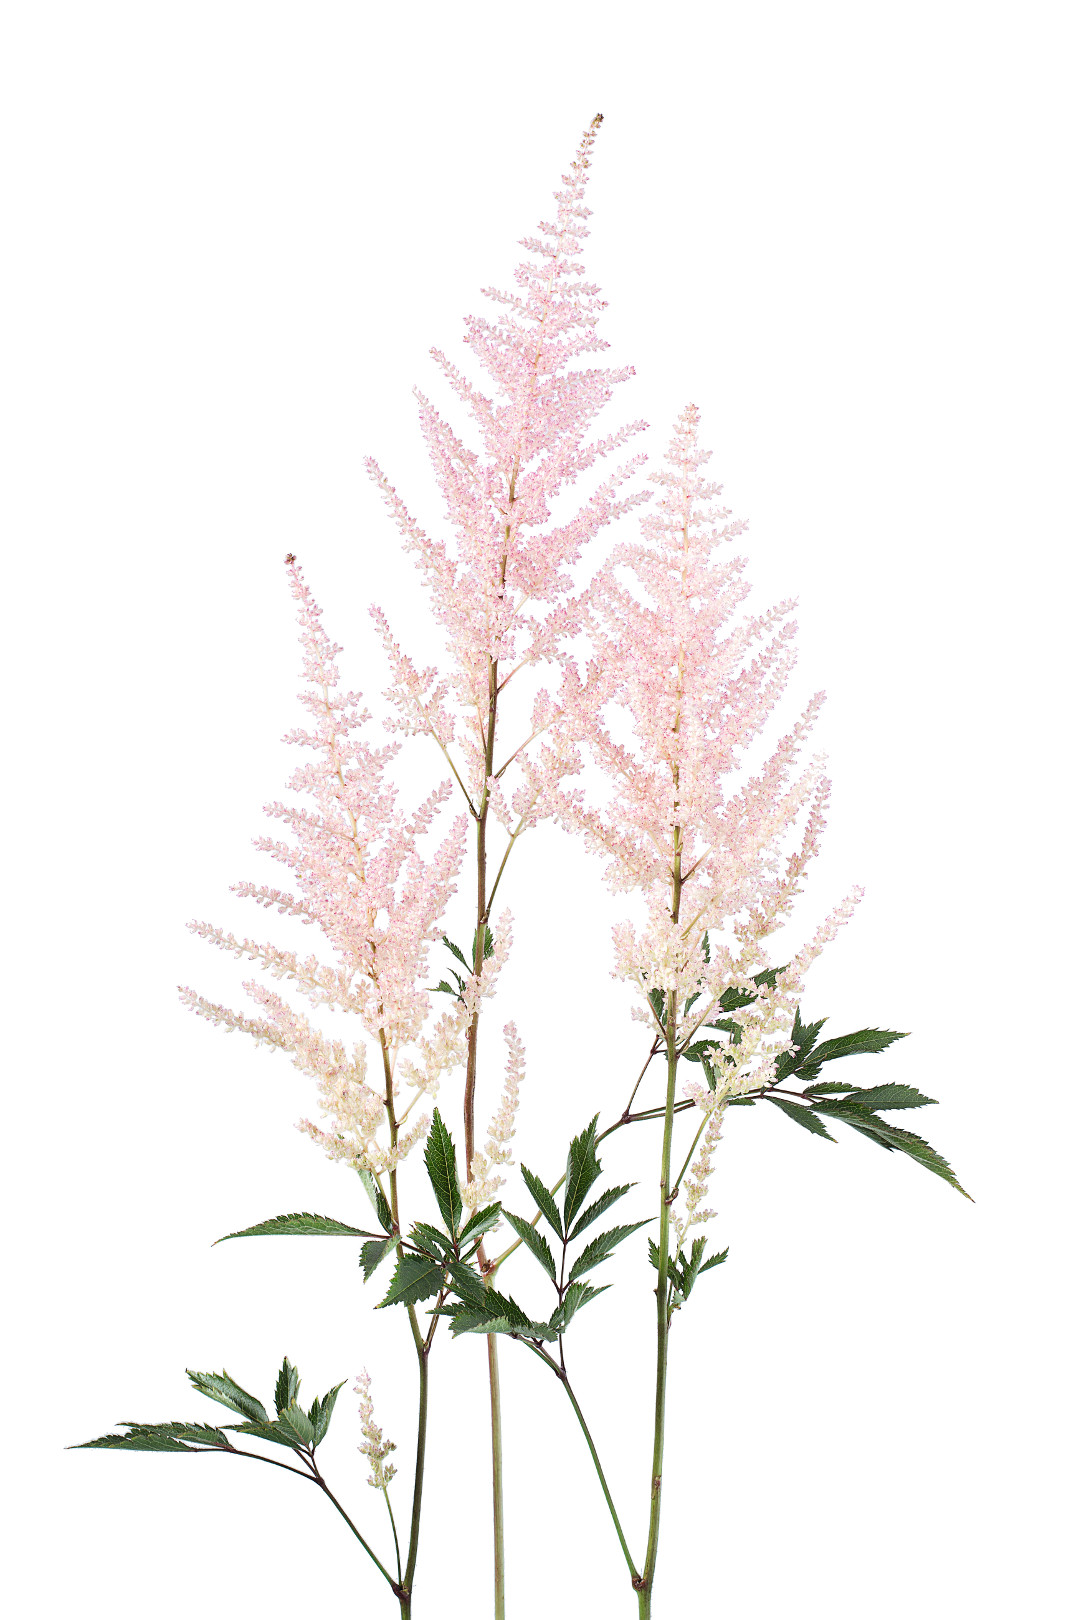 Astilbe from The Flower Colour Guide